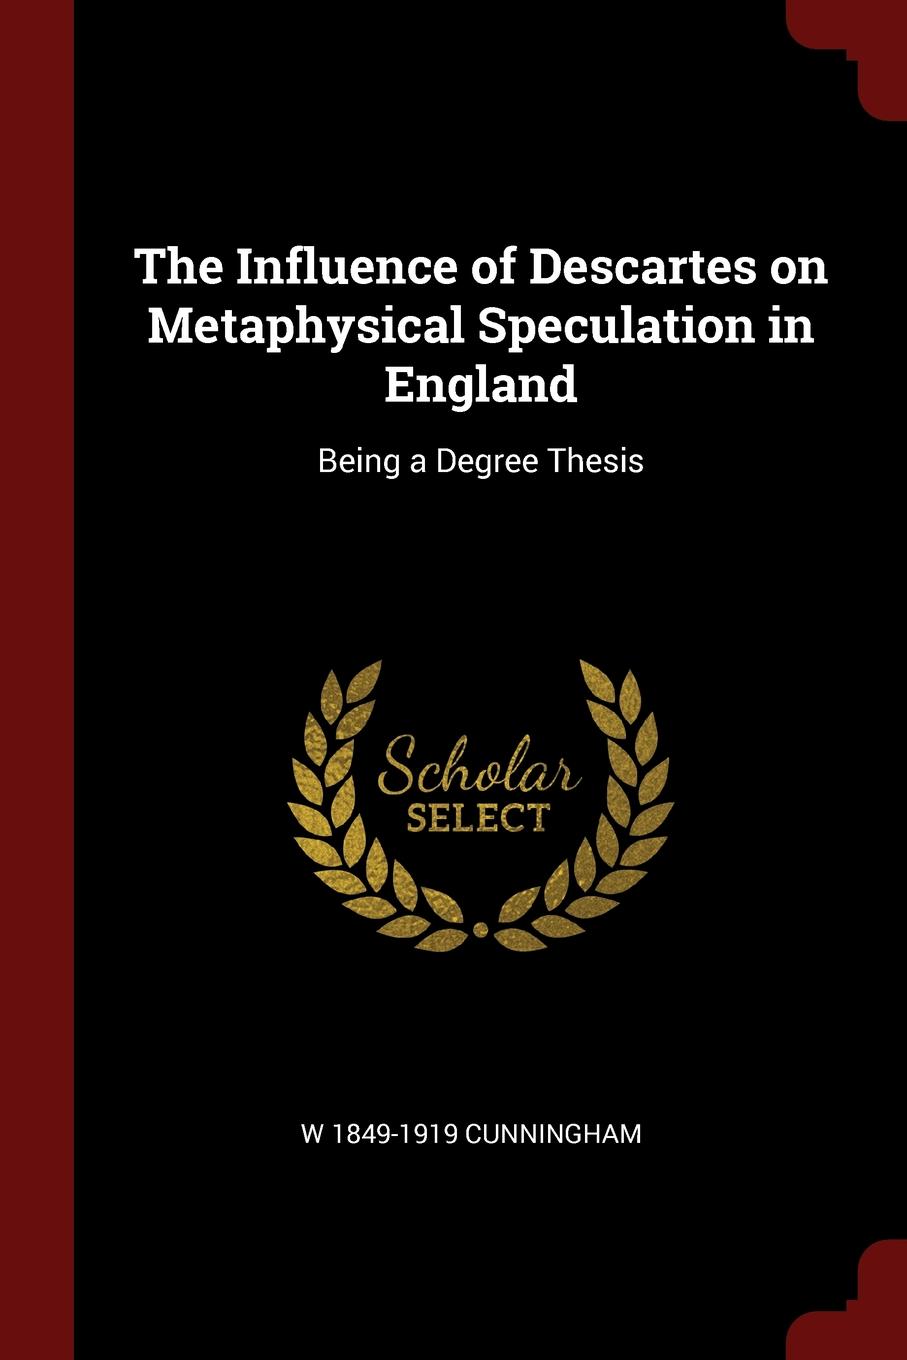 The Influence of Descartes on Metaphysical Speculation in England. Being a Degree Thesis